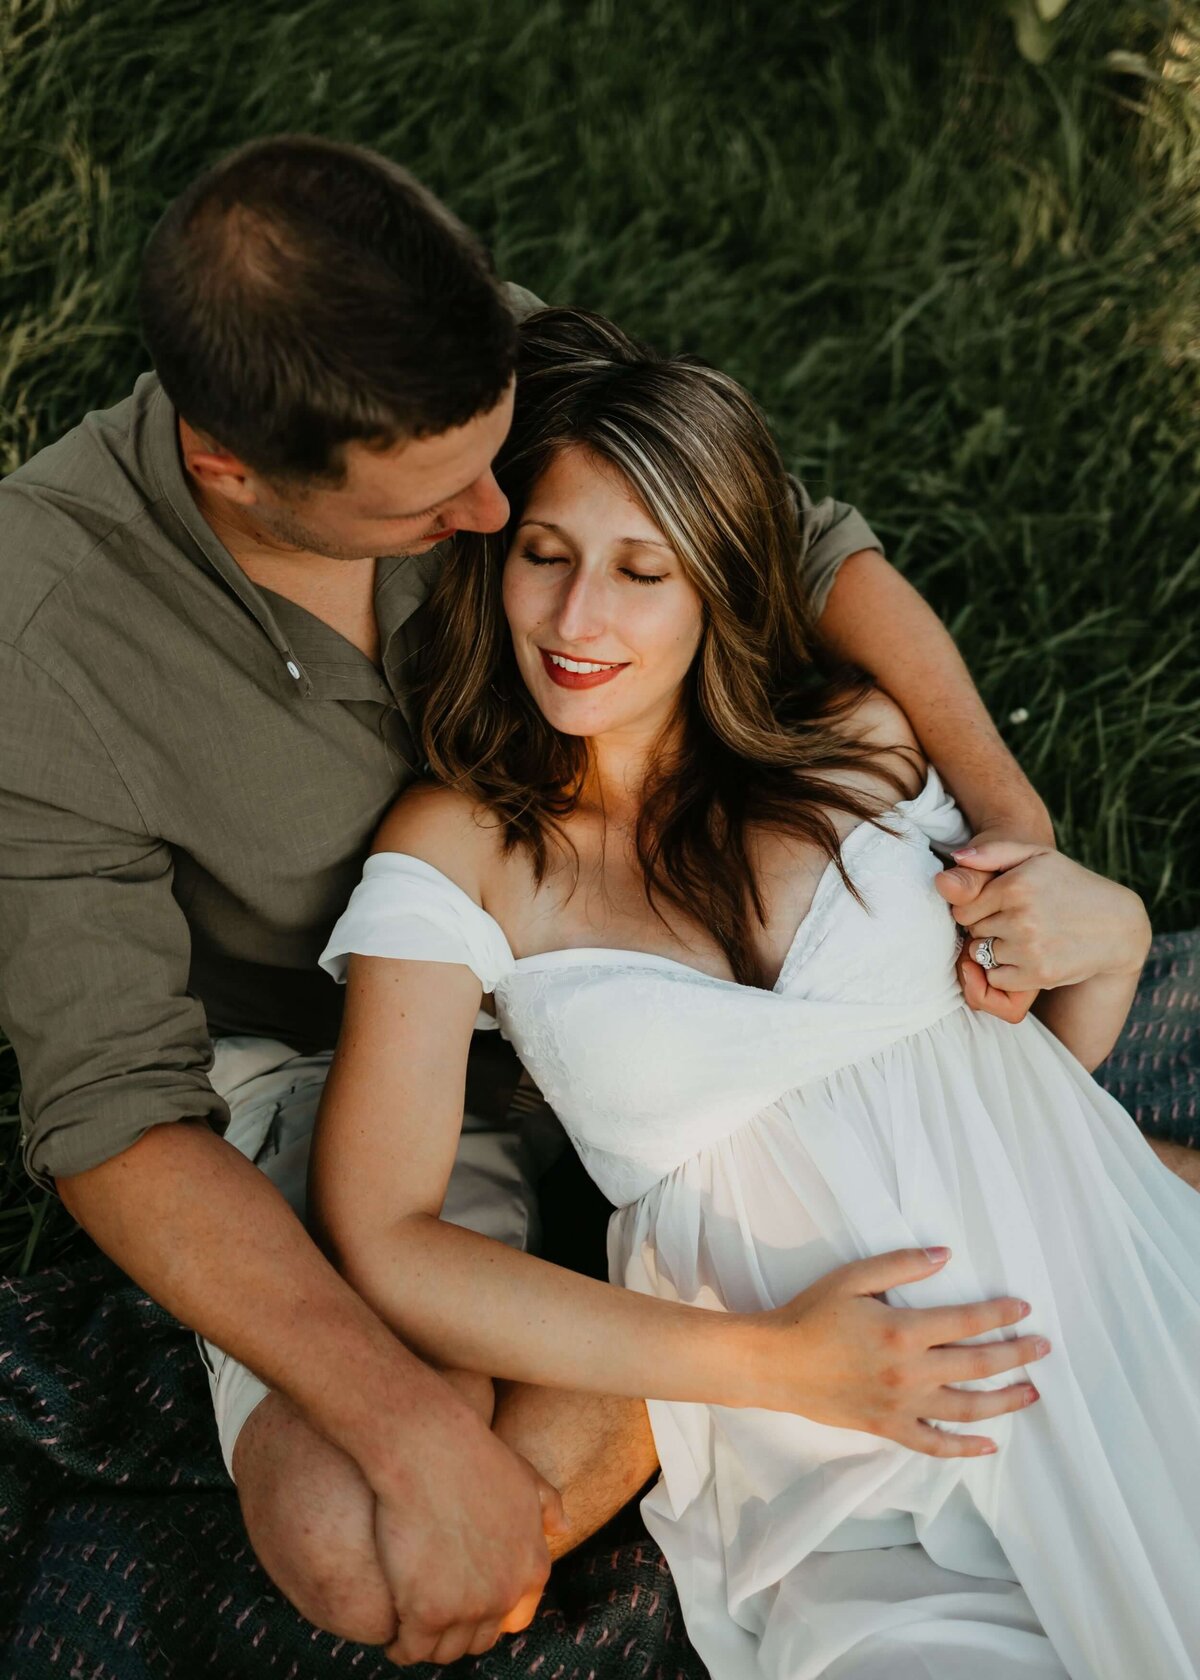 A couple expecting a baby, peacefully lounging on a blanket in a grassy field as captured by a Pittsburgh maternity photographer.